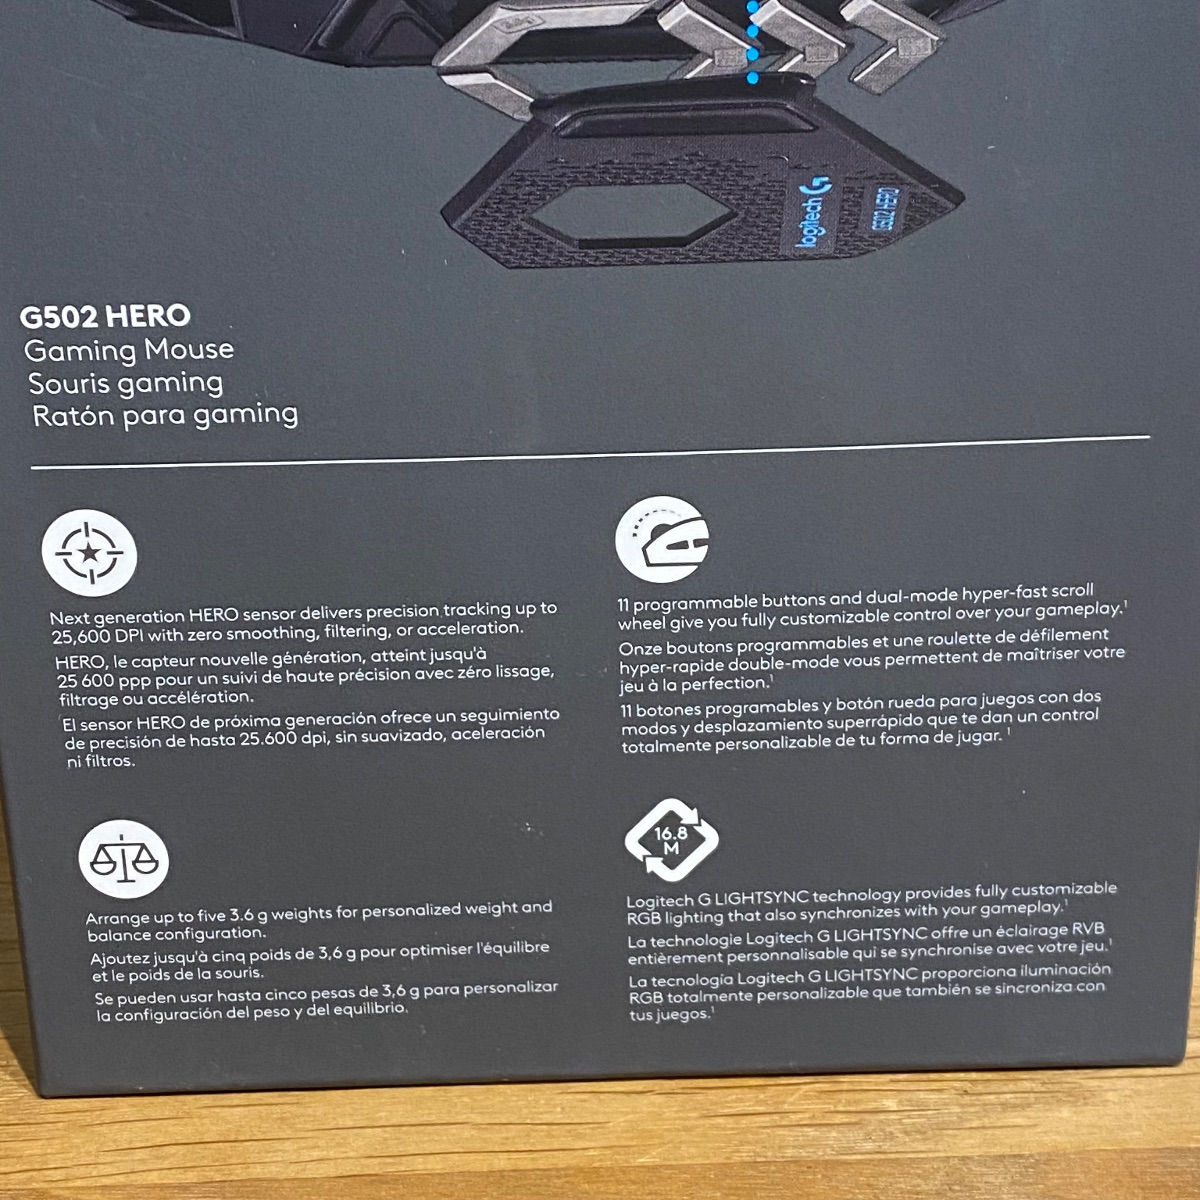 Logitech G502 Hero High Performance Wired Gaming Mouse - Black 100% Original 910004617 5099206080270 (Brand New)